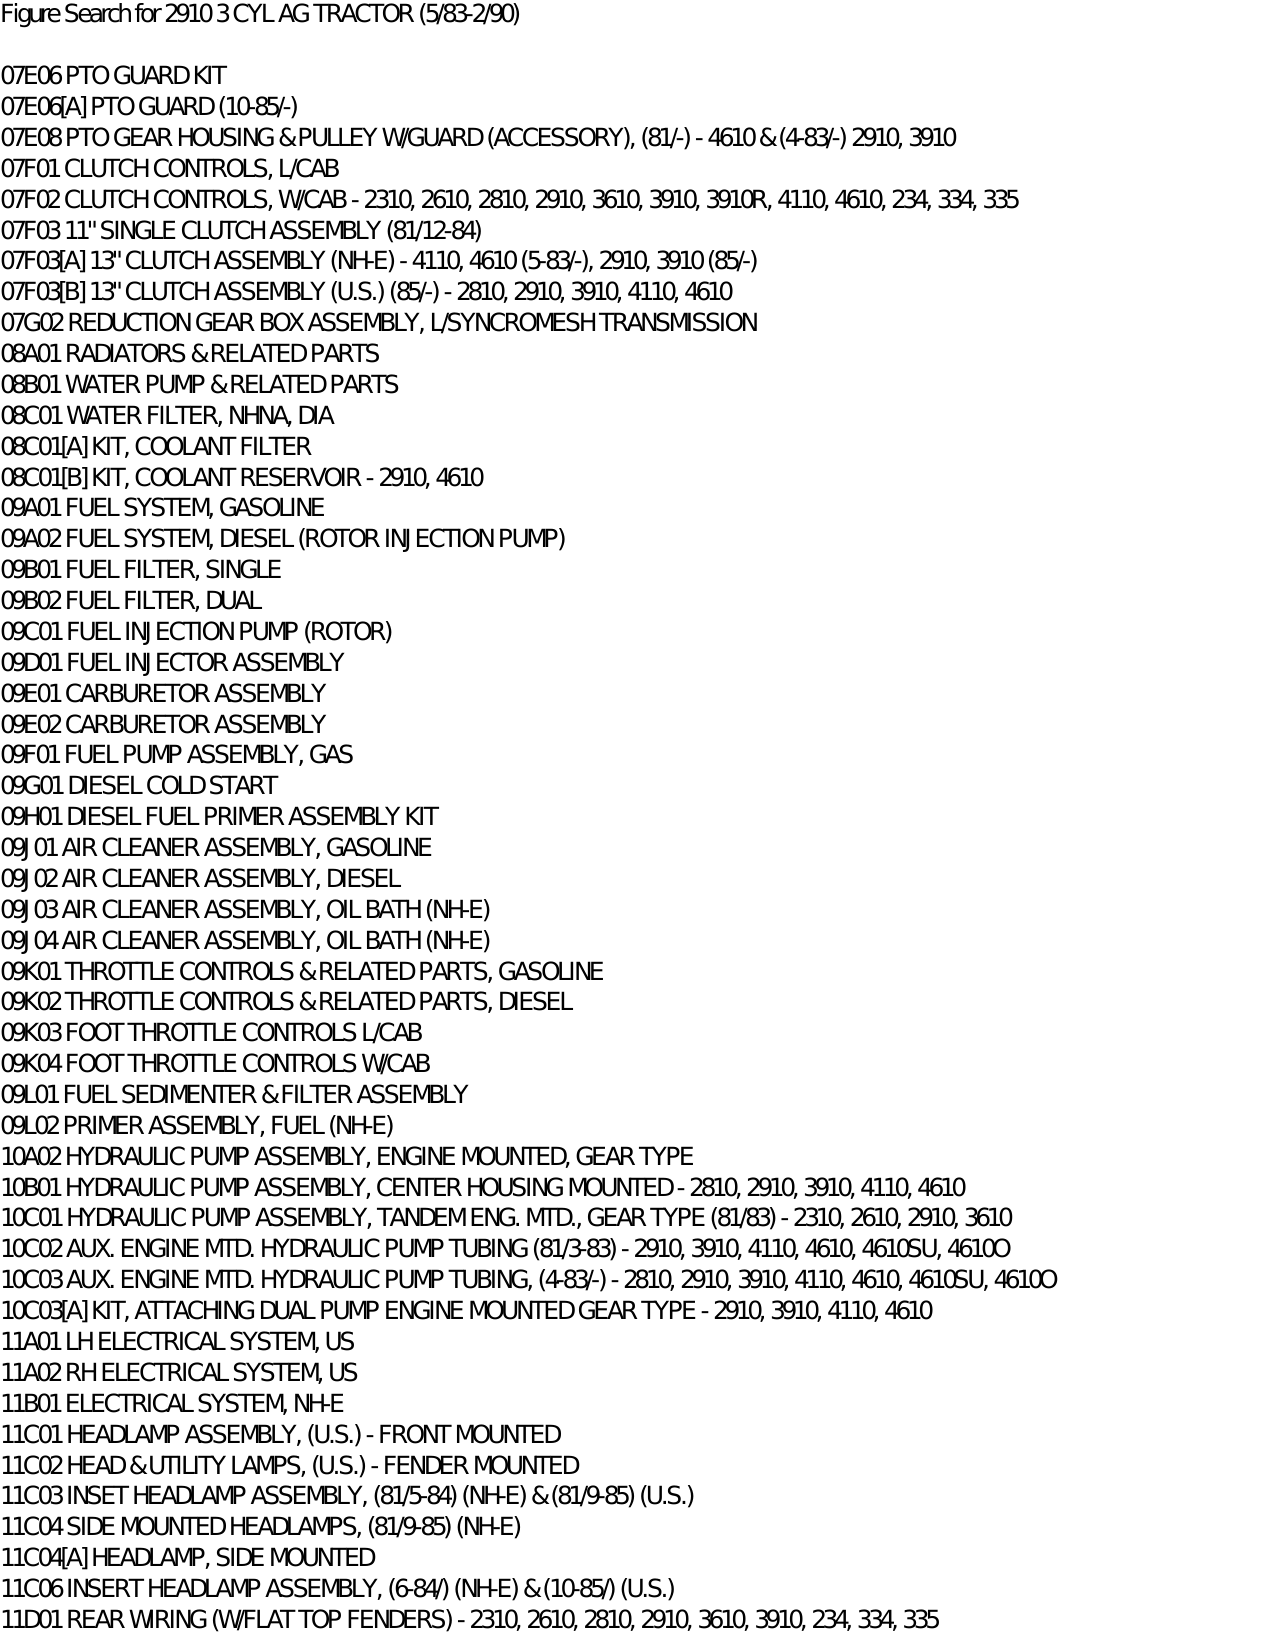 1983-1989 Ford 2910 tractor parts list Preview image 5